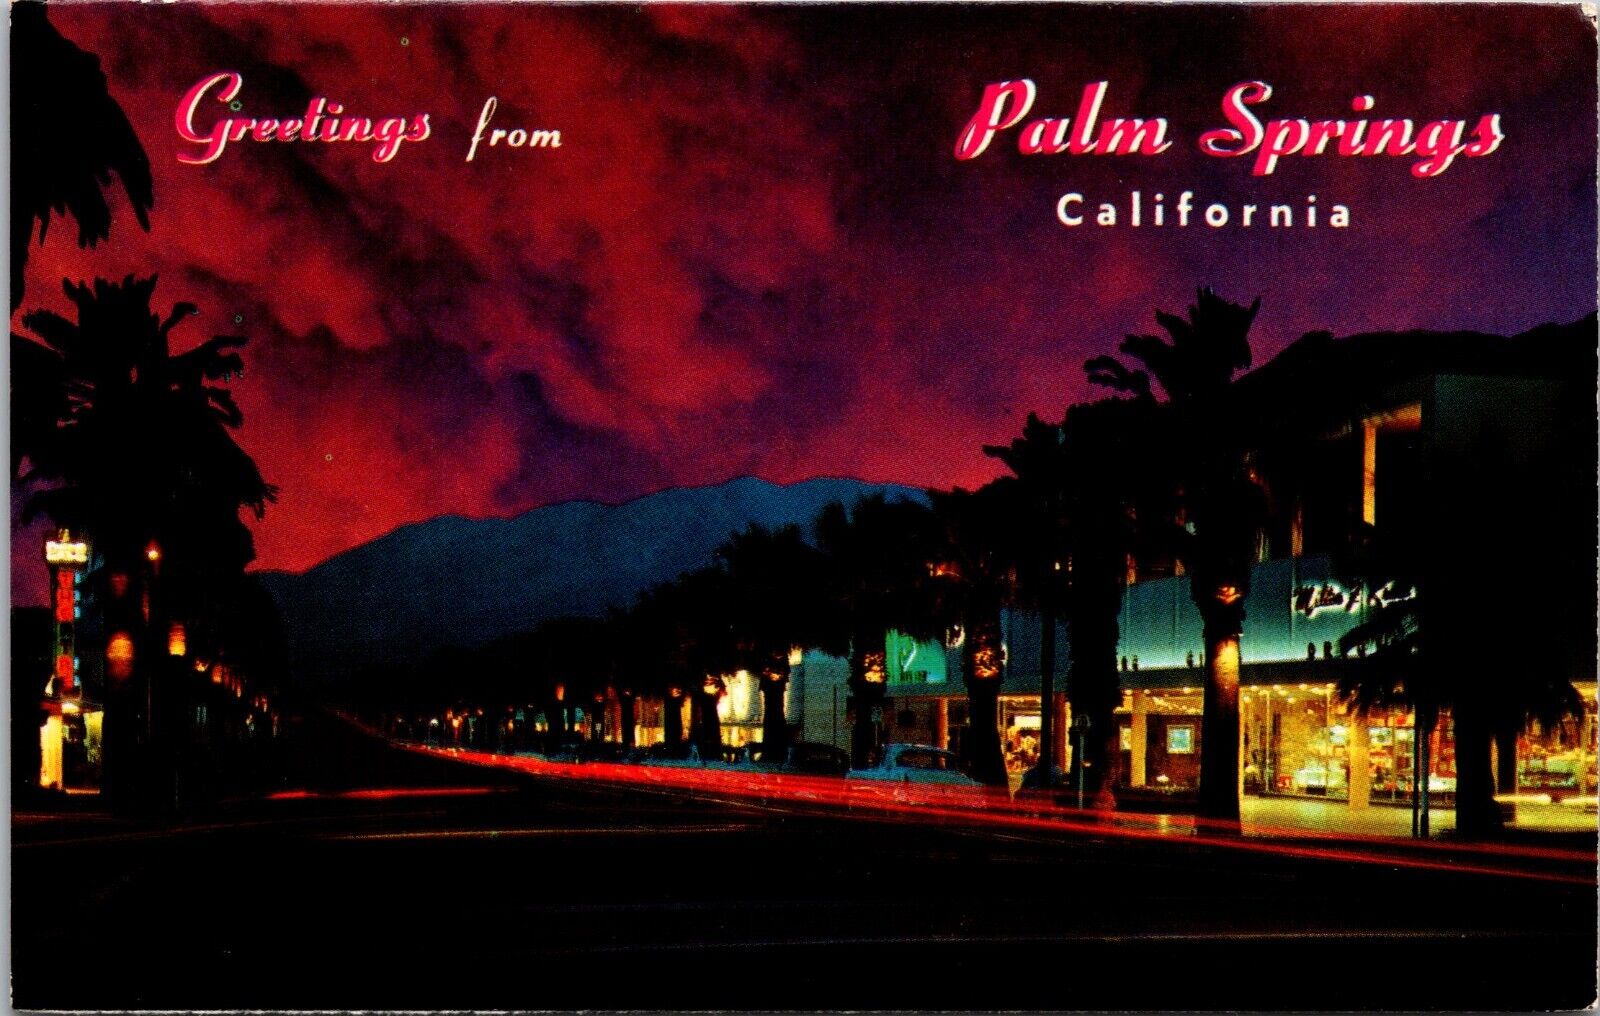 Postcard Greetings from Palm Springs California  Illuminated Palms & Lights [bl]